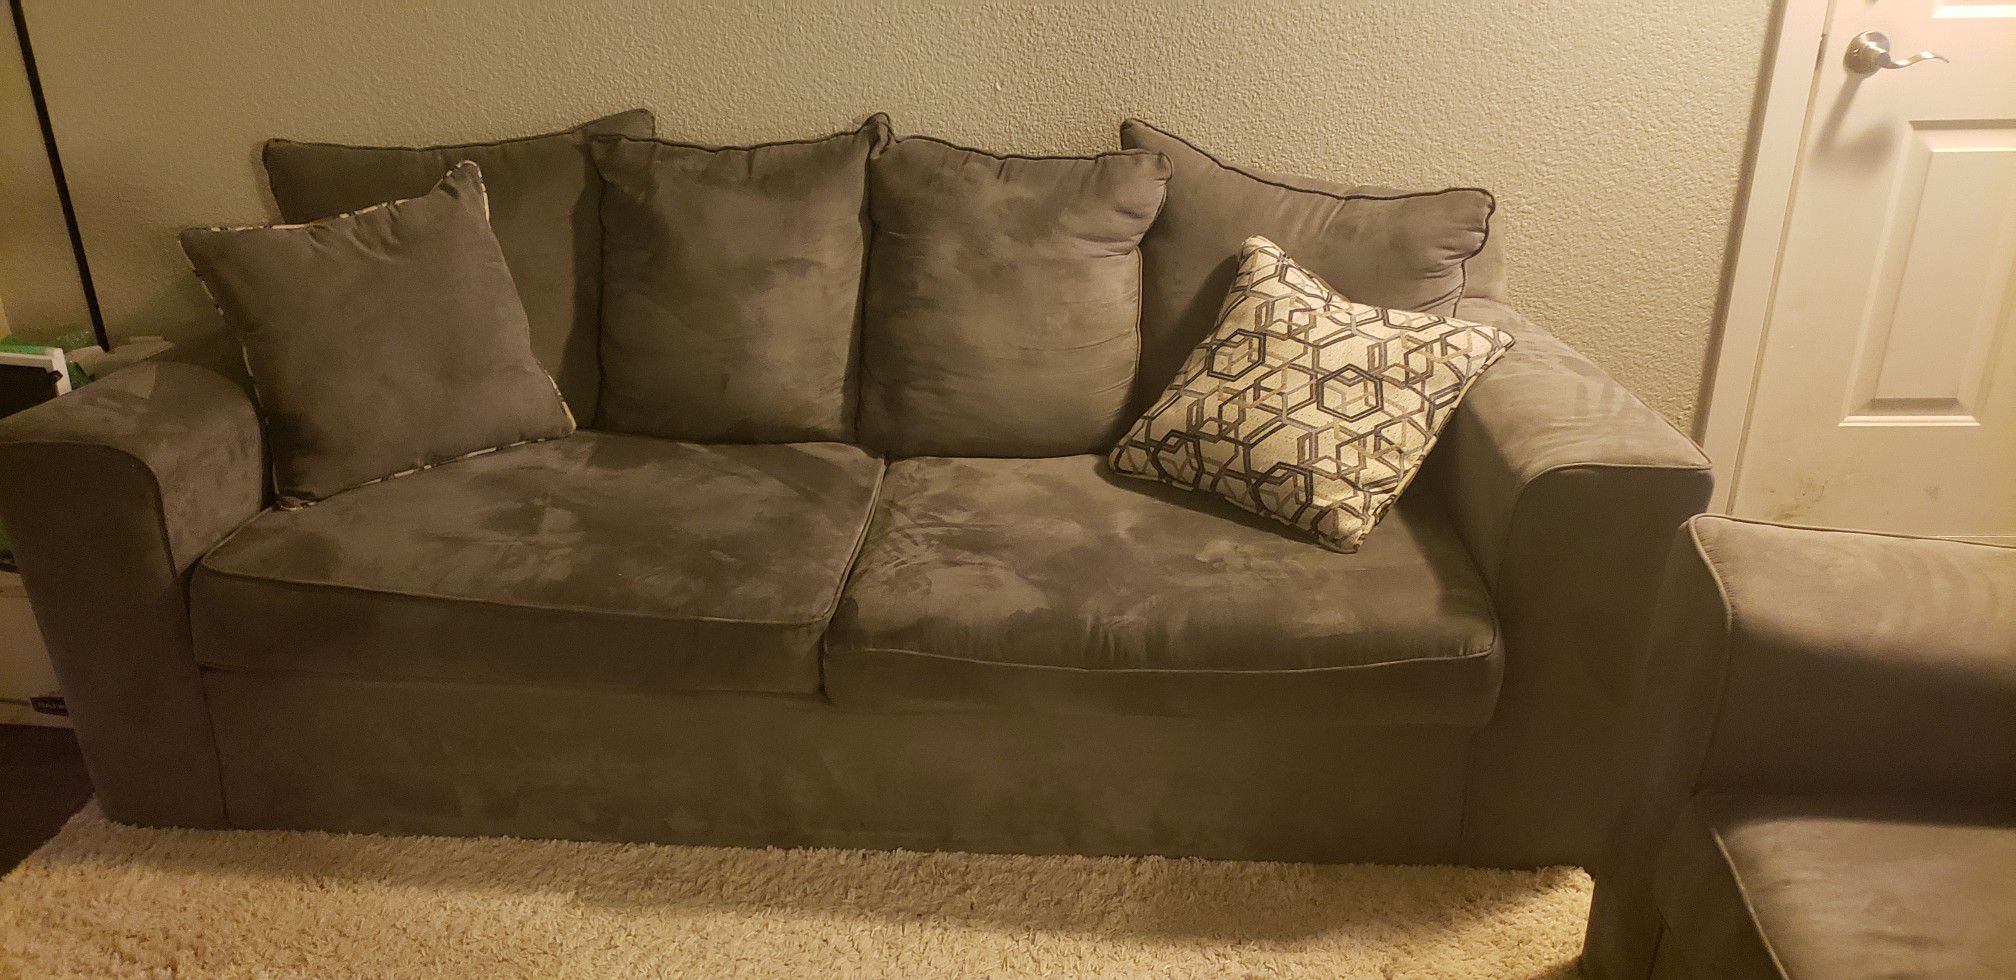 Great grey couch and chair set